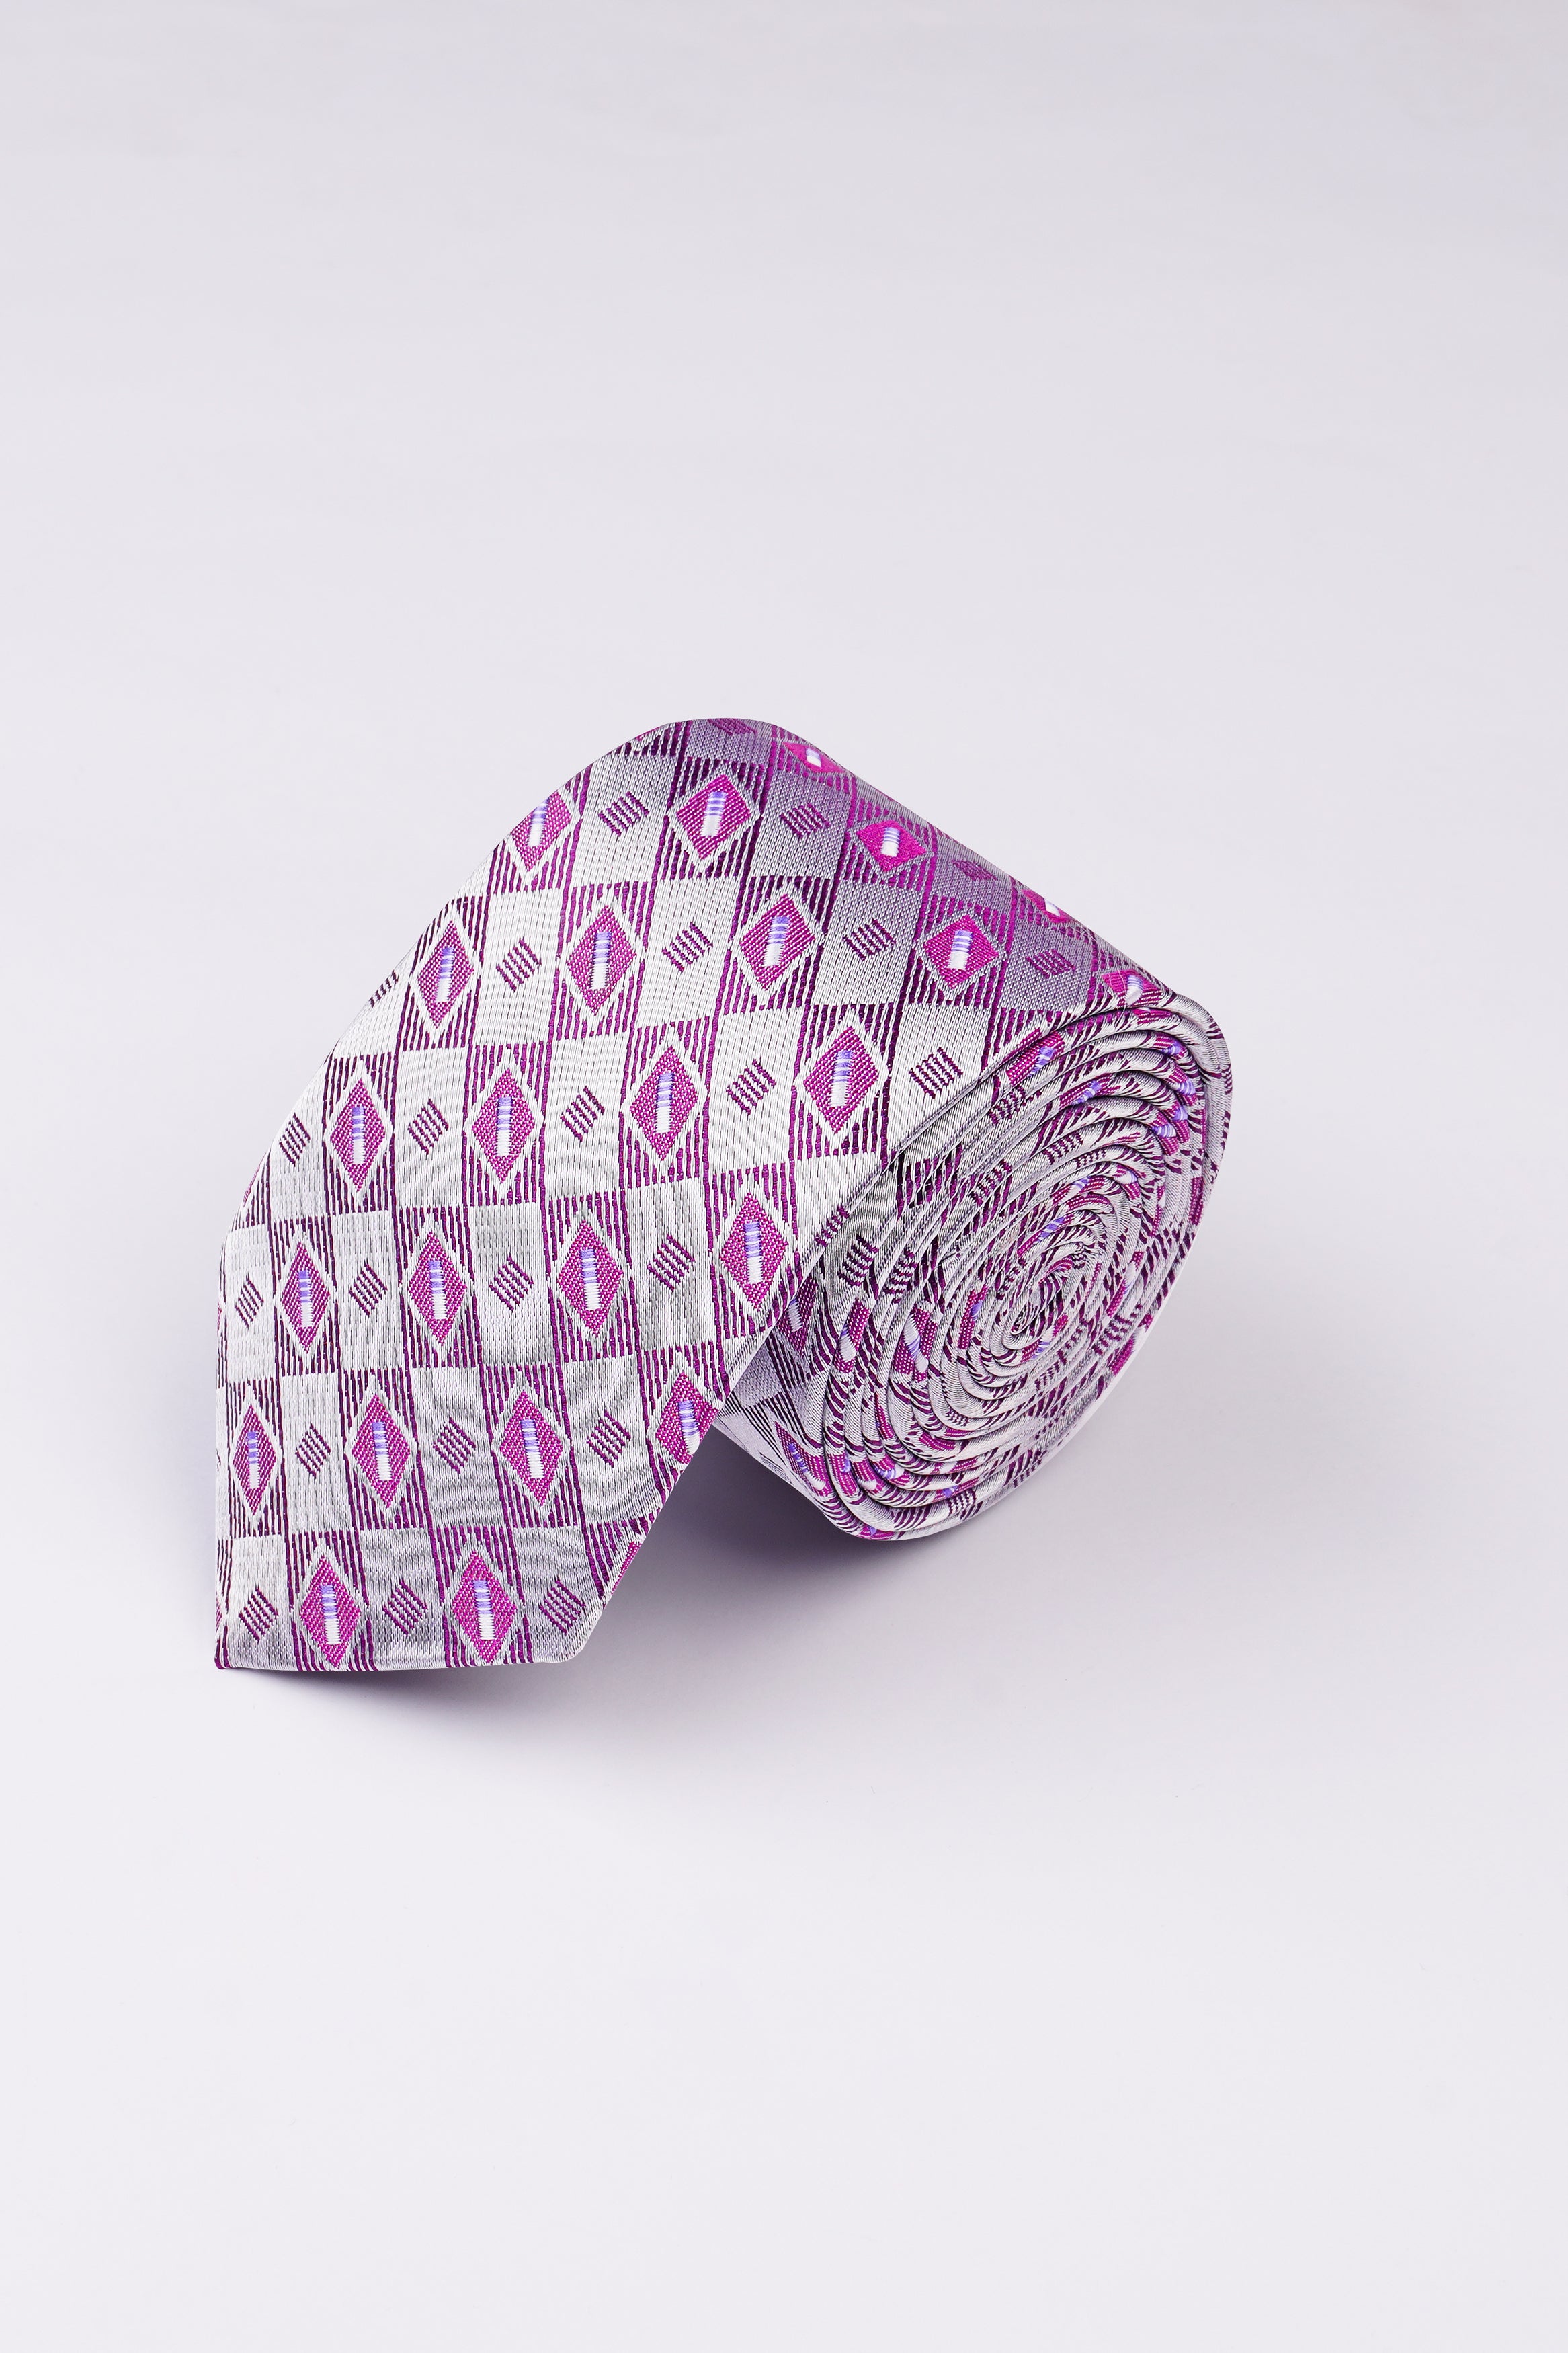 Mischka Gray with Plum Purple Jacquard Tie with Pocket Square TP045